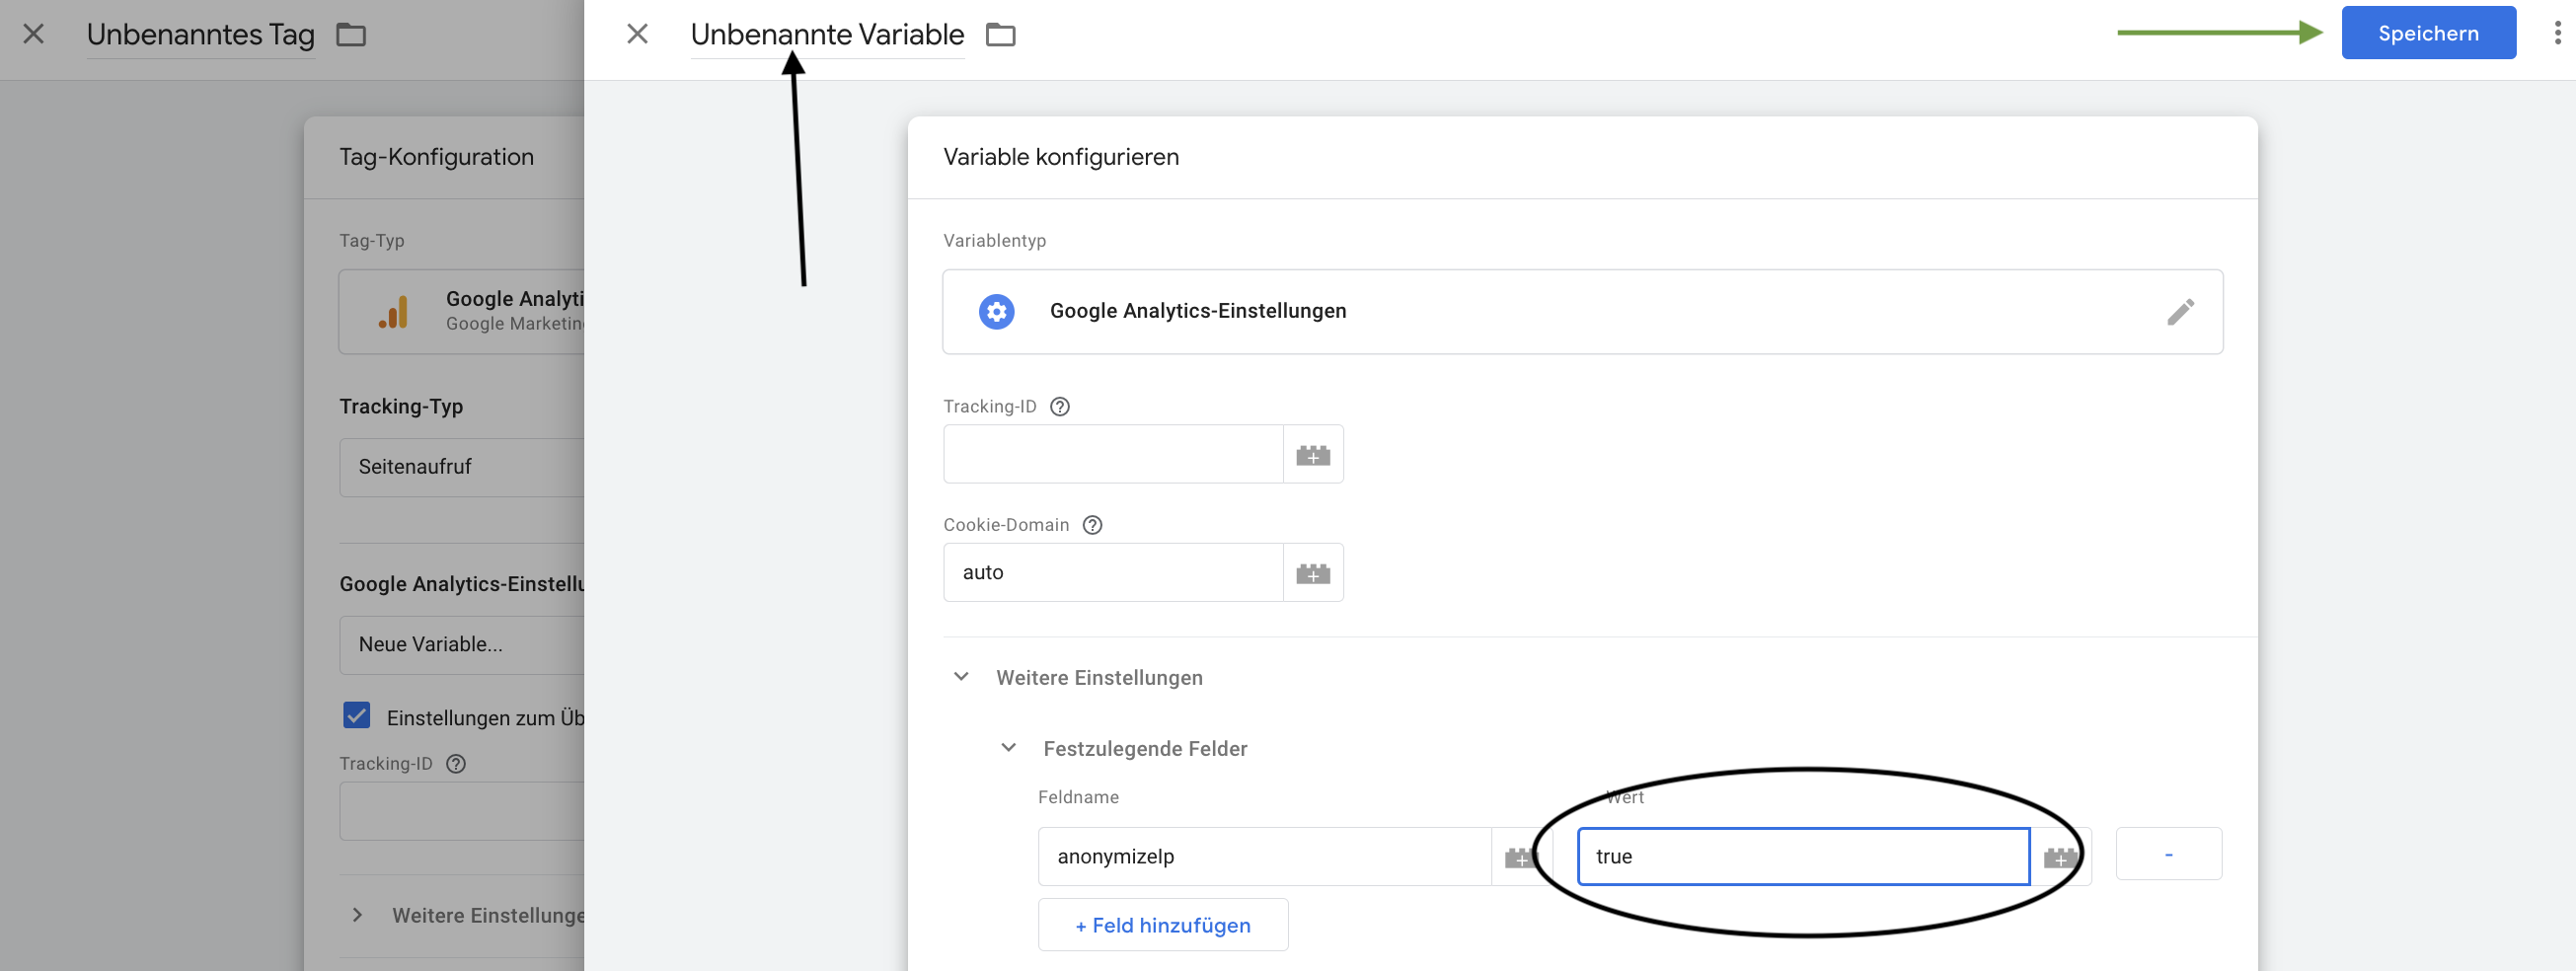 Google Tag Manager Google Analytics Variable benennen